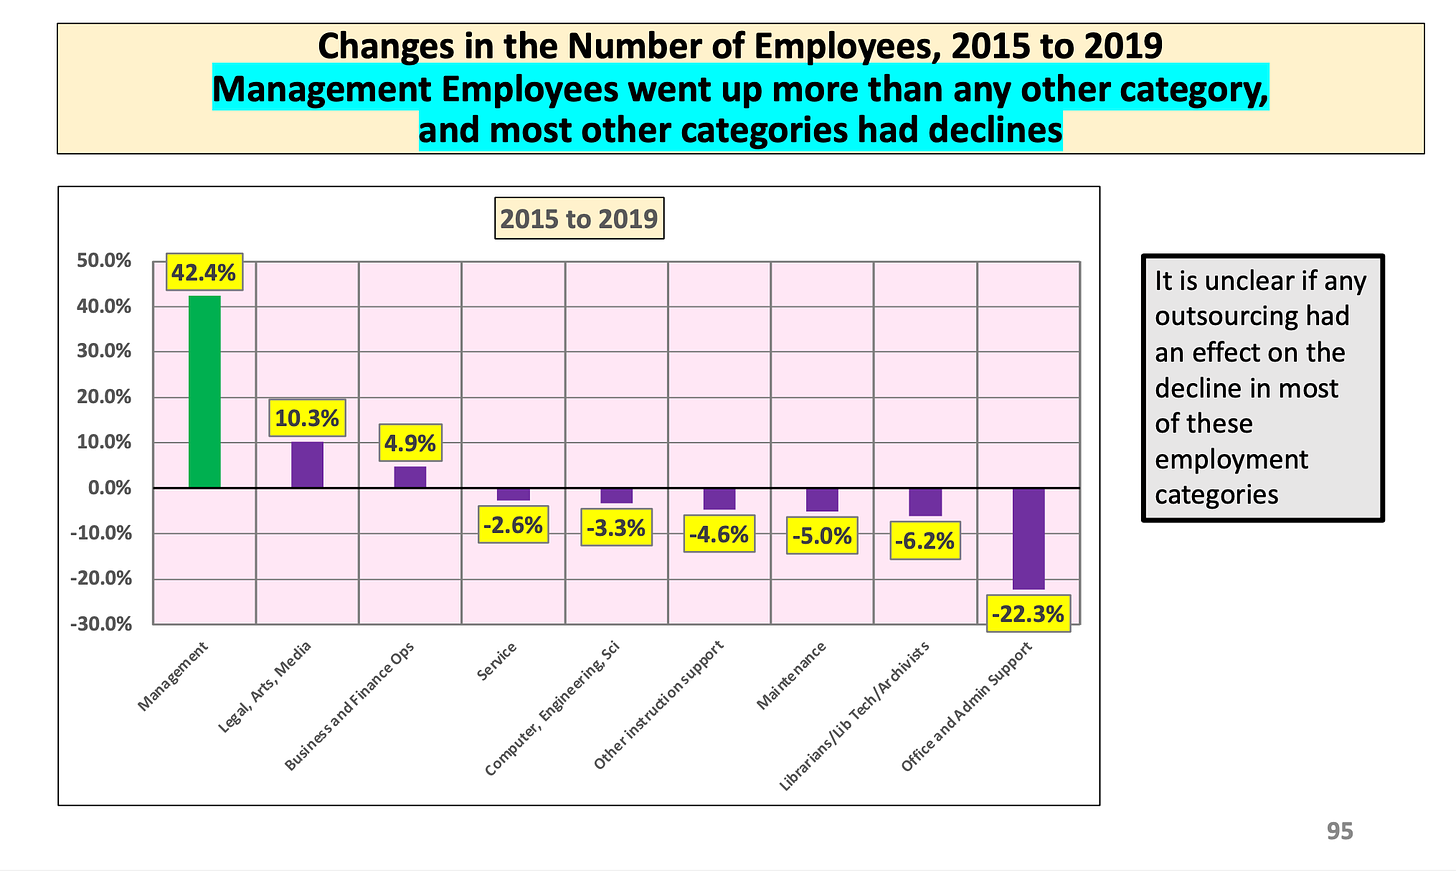 Change in Number of Employees, 2015 to 2019. Management Employees went up more than any other category and most other categories had declines